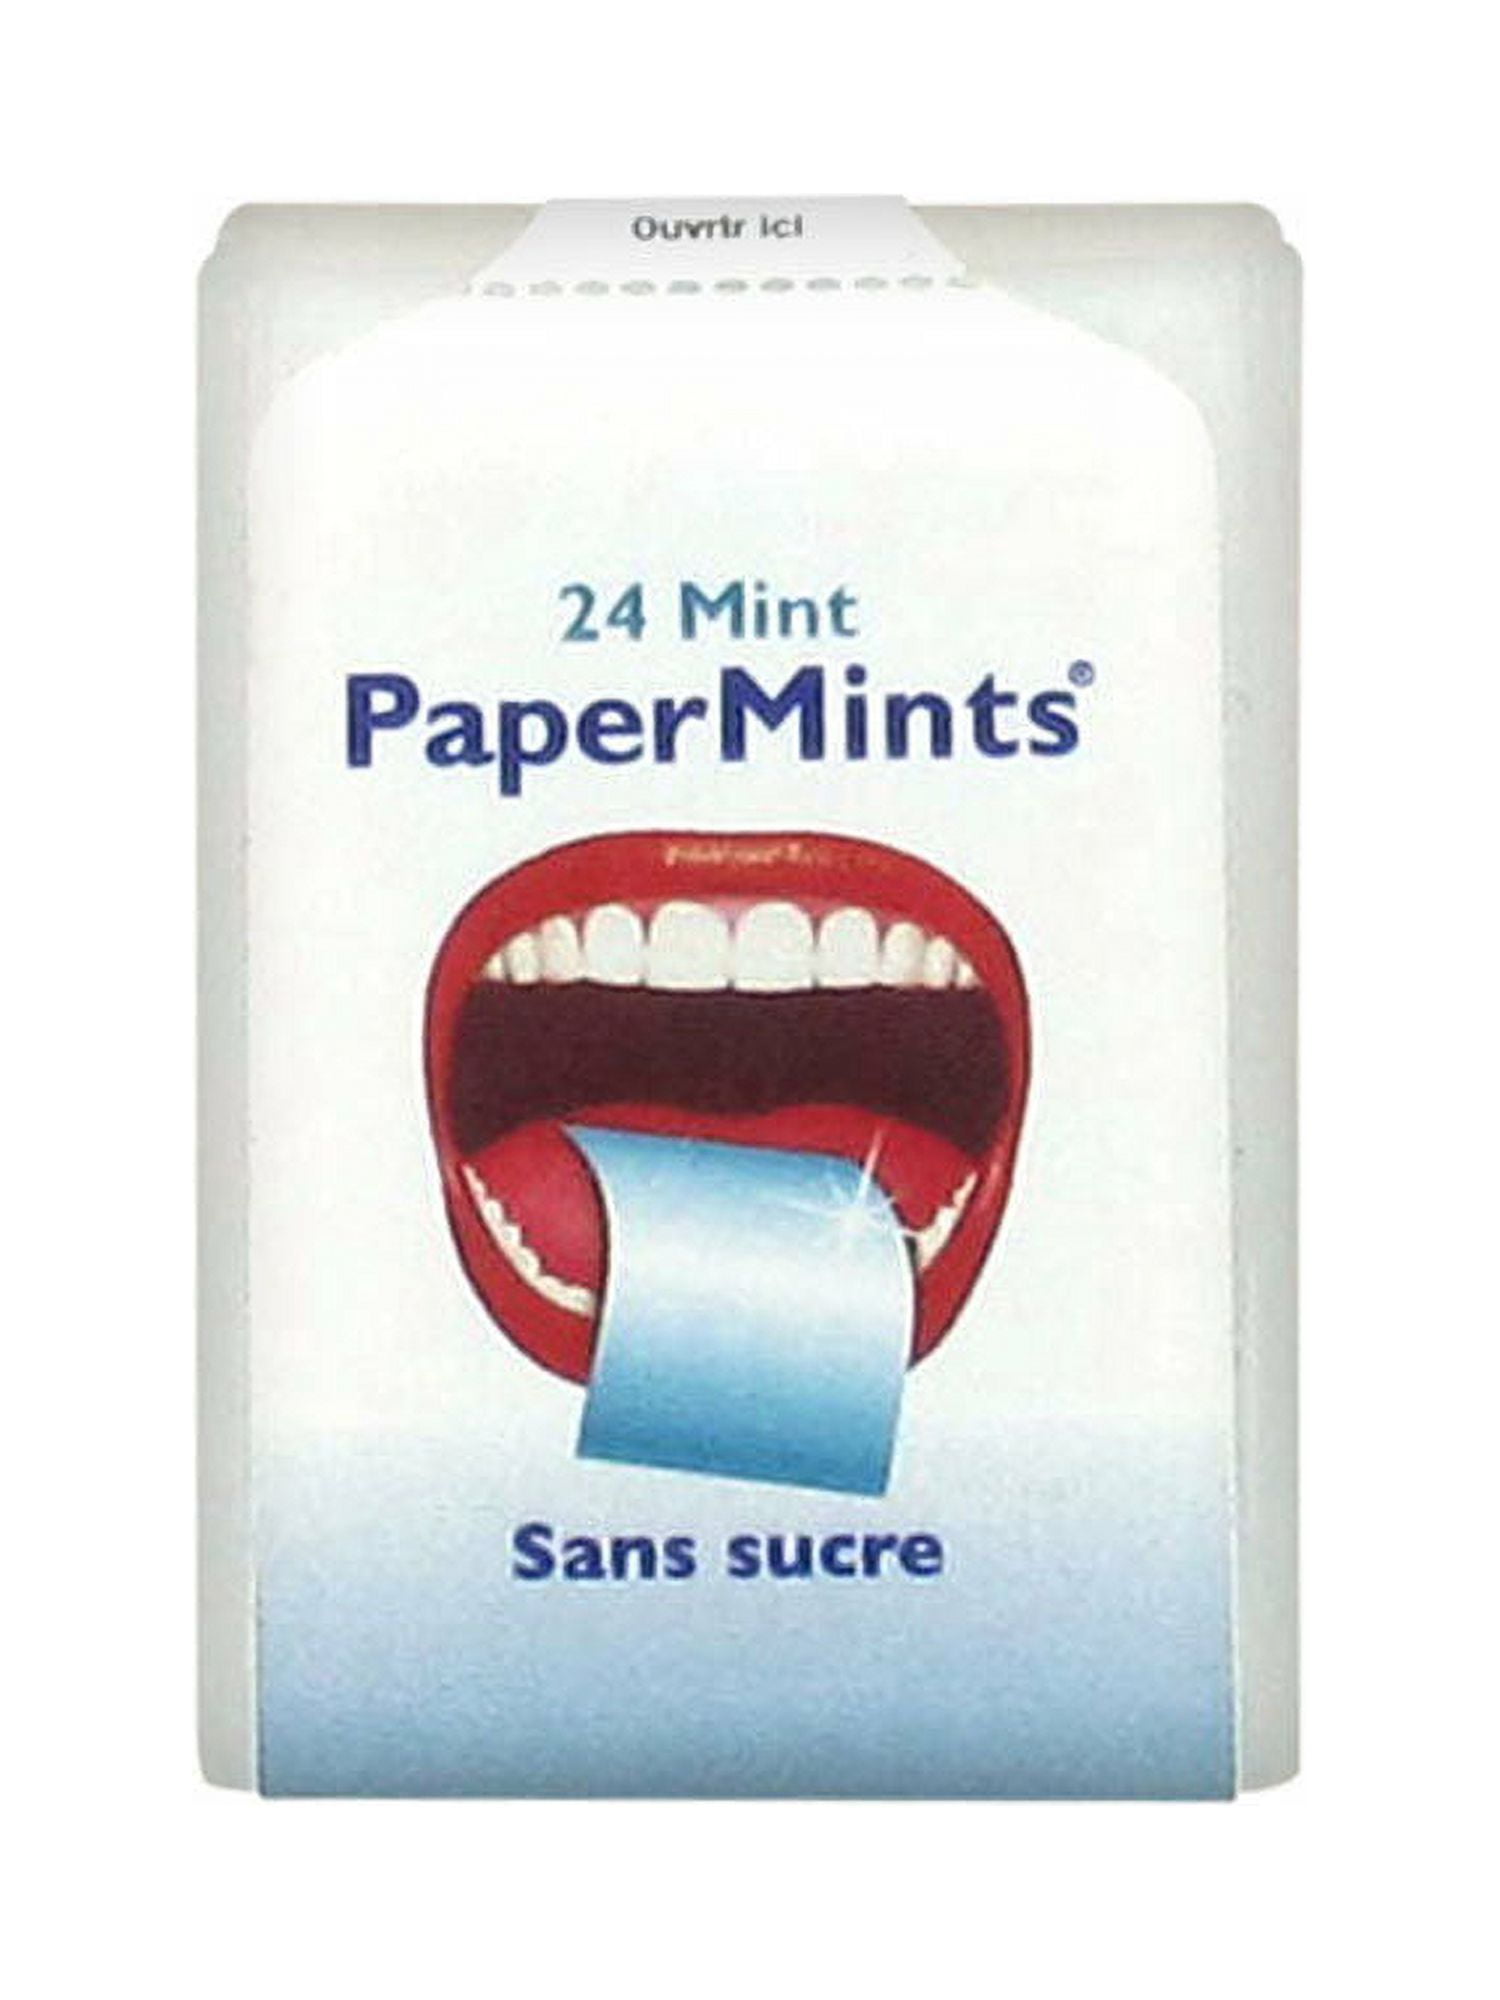 Easywellbeing Healthshop PaperMints Cool mint strips 3 x packs of